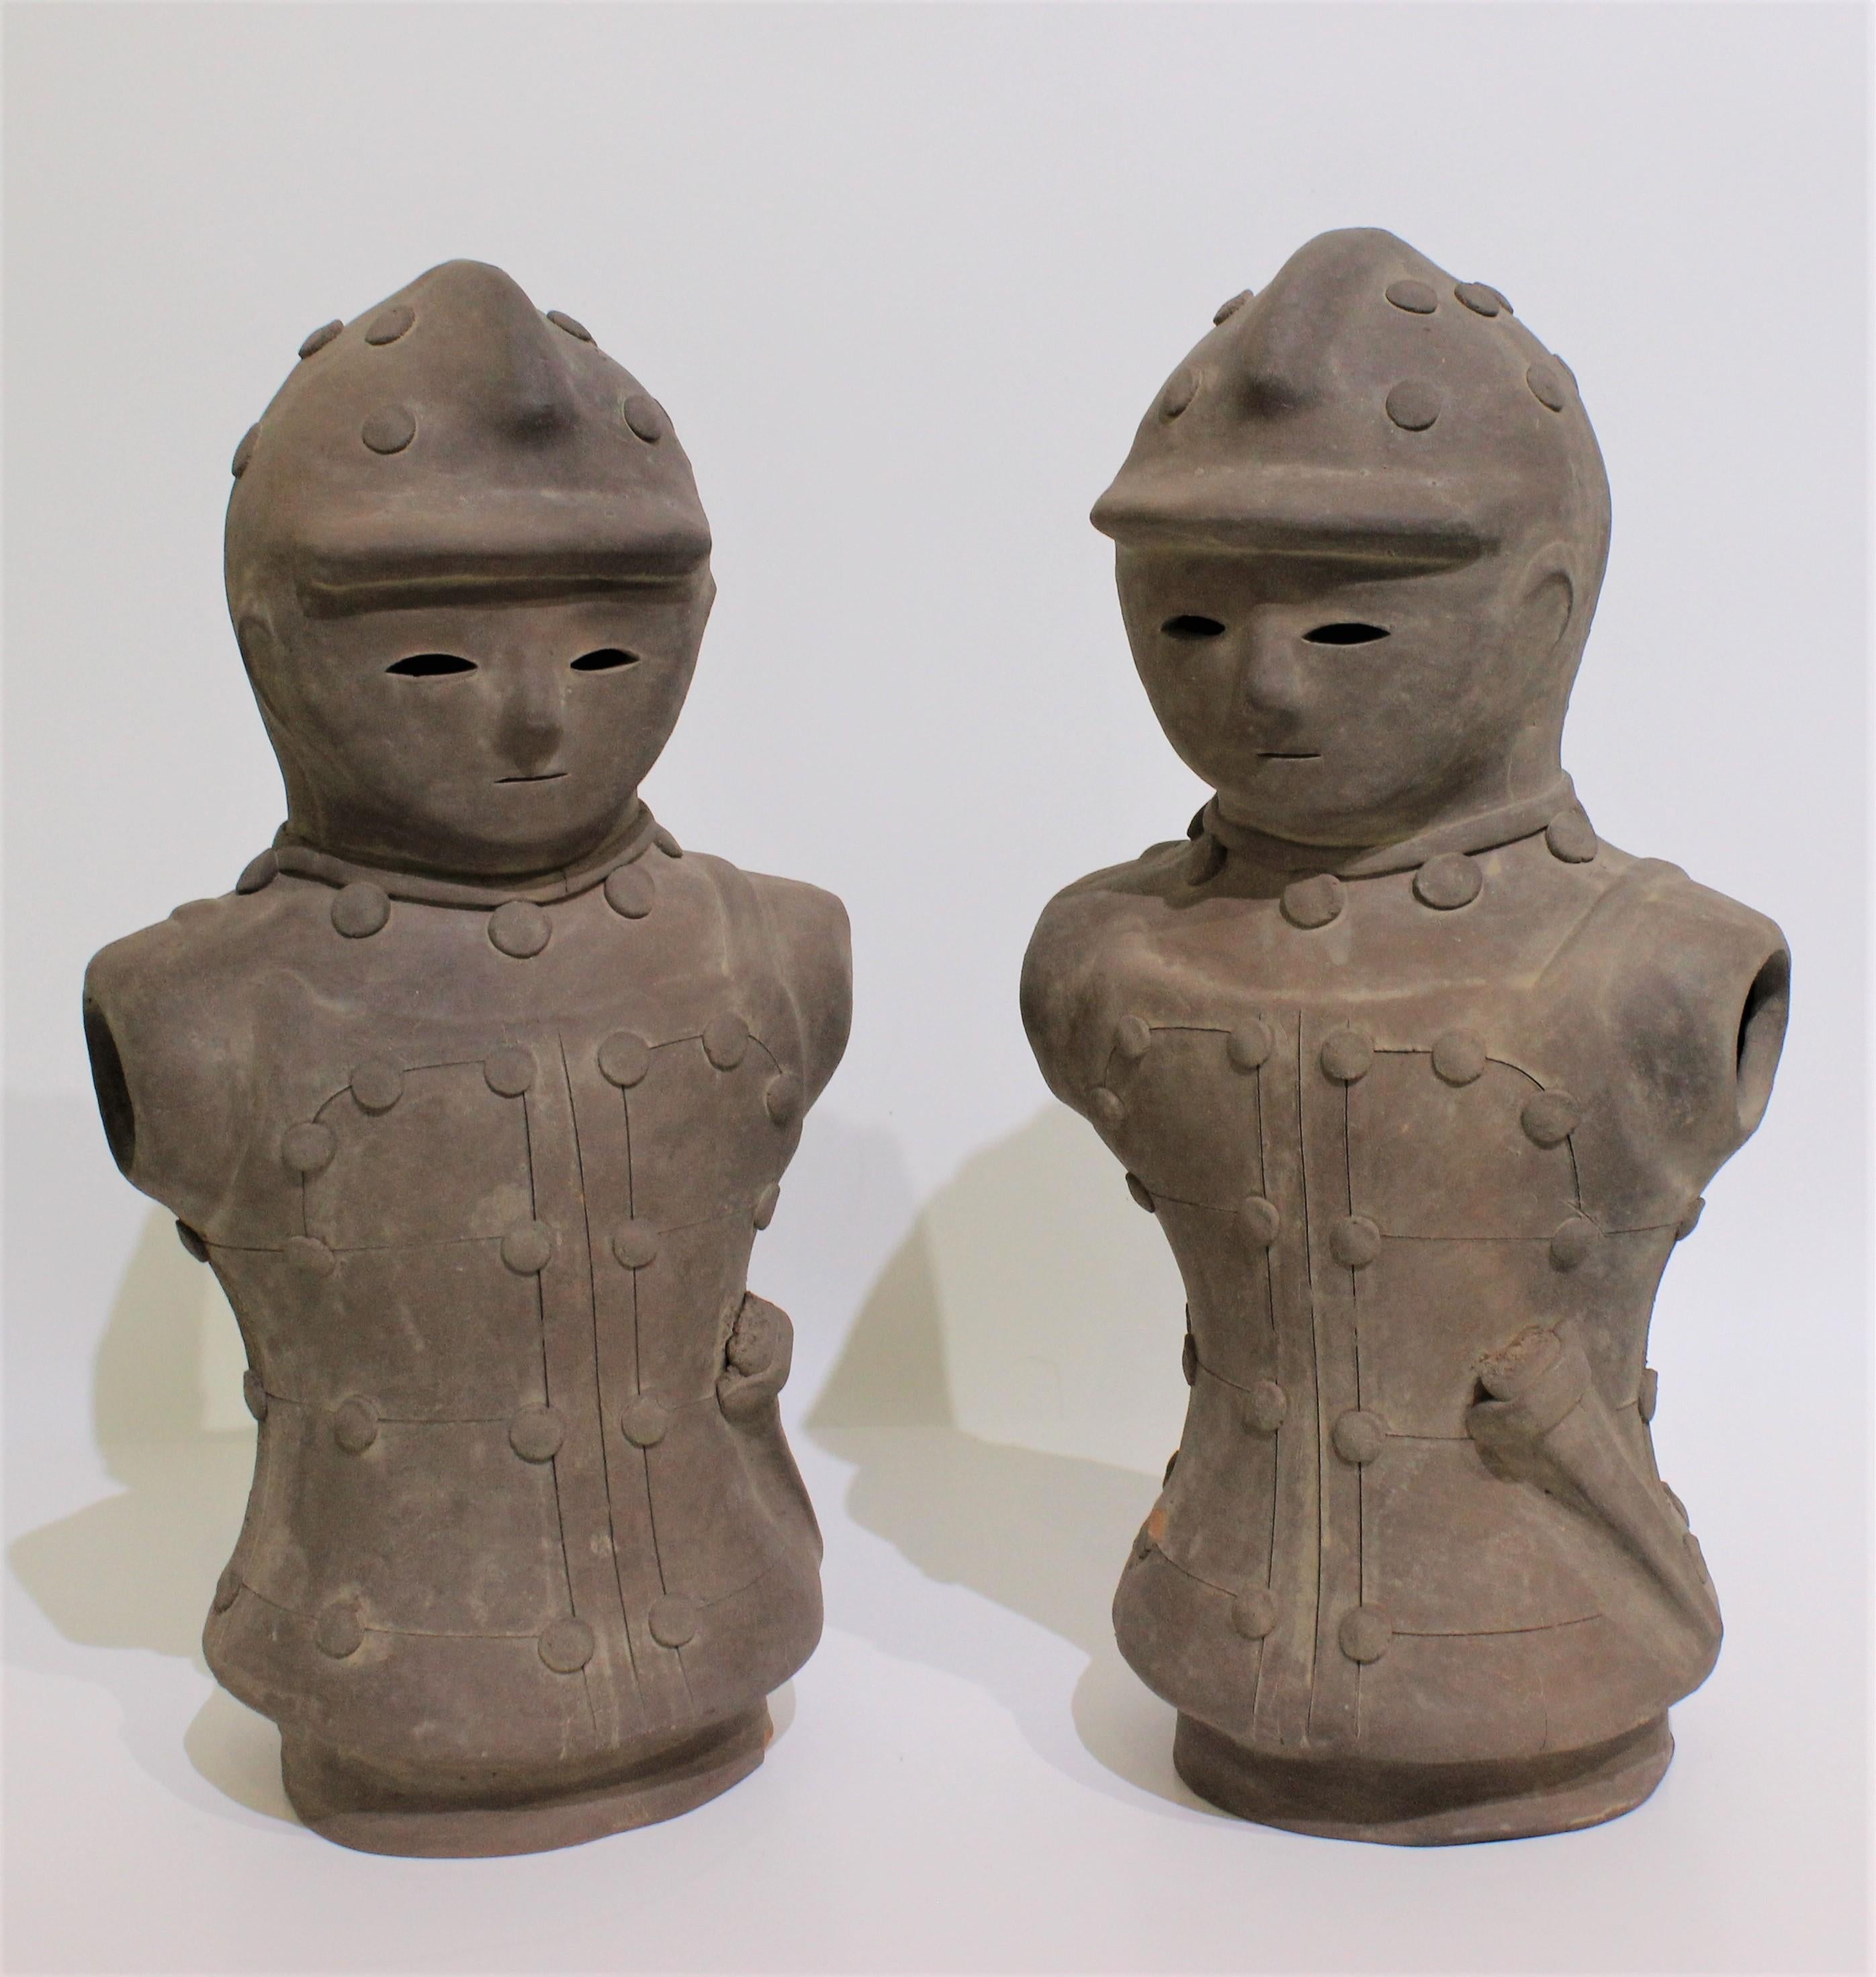 Vintage Haniwa Style Figures Unglazed Terra Cotta Japan - a set of two - from a Palm Beach estate

There is a small chip on the base of one and a chip on the button of the other. See photos.

Both are 15 3/4